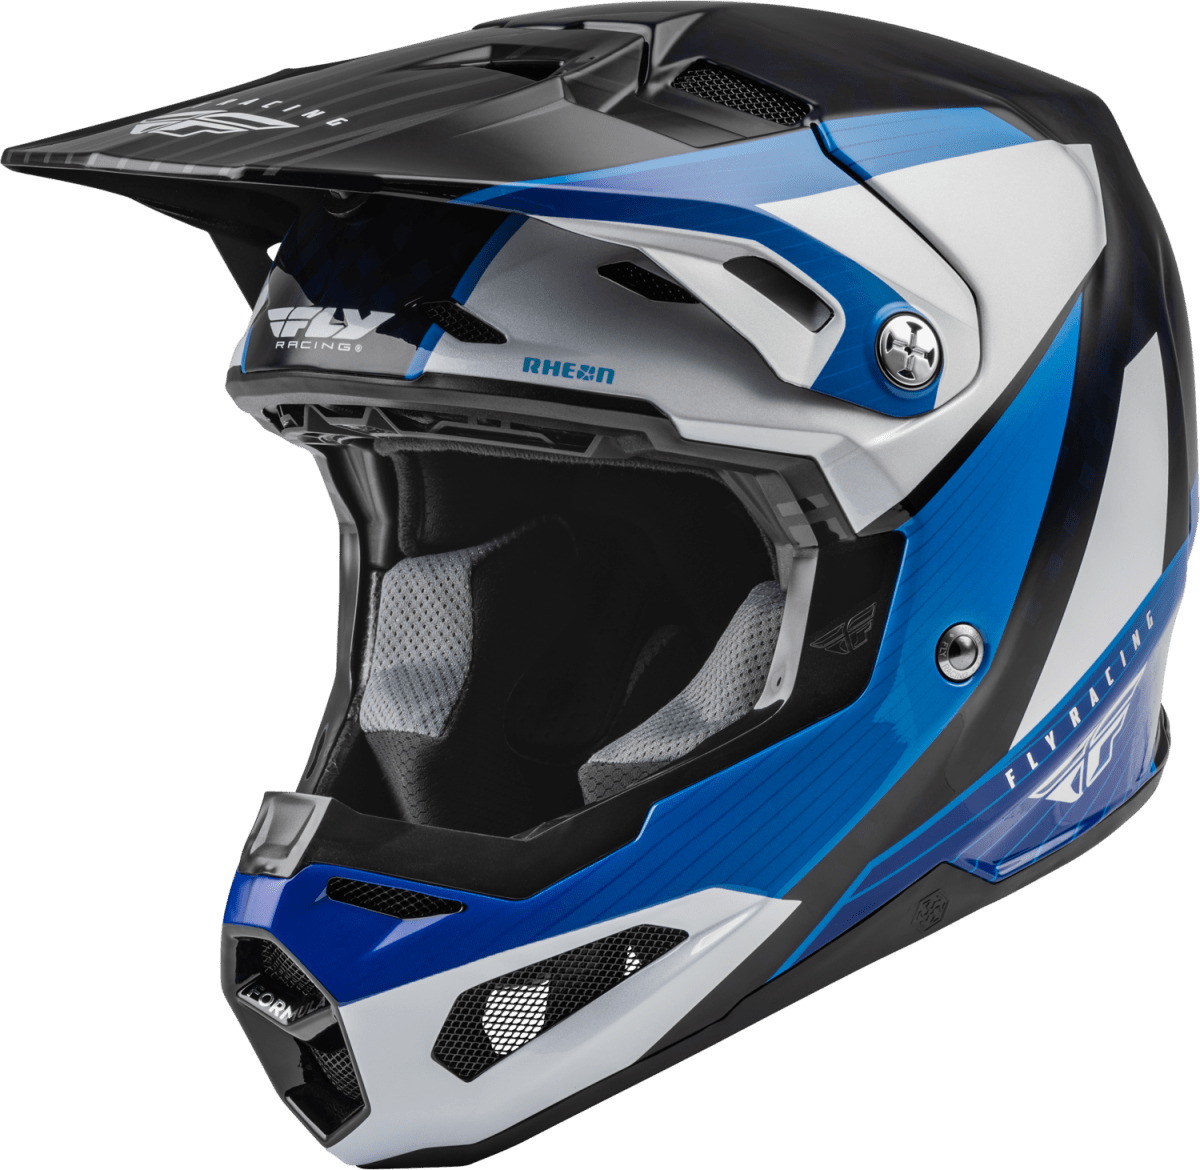 FLY RACING - YOUTH FORMULA CARBON PRIME HELMET - 73-4430YL - 191361283376